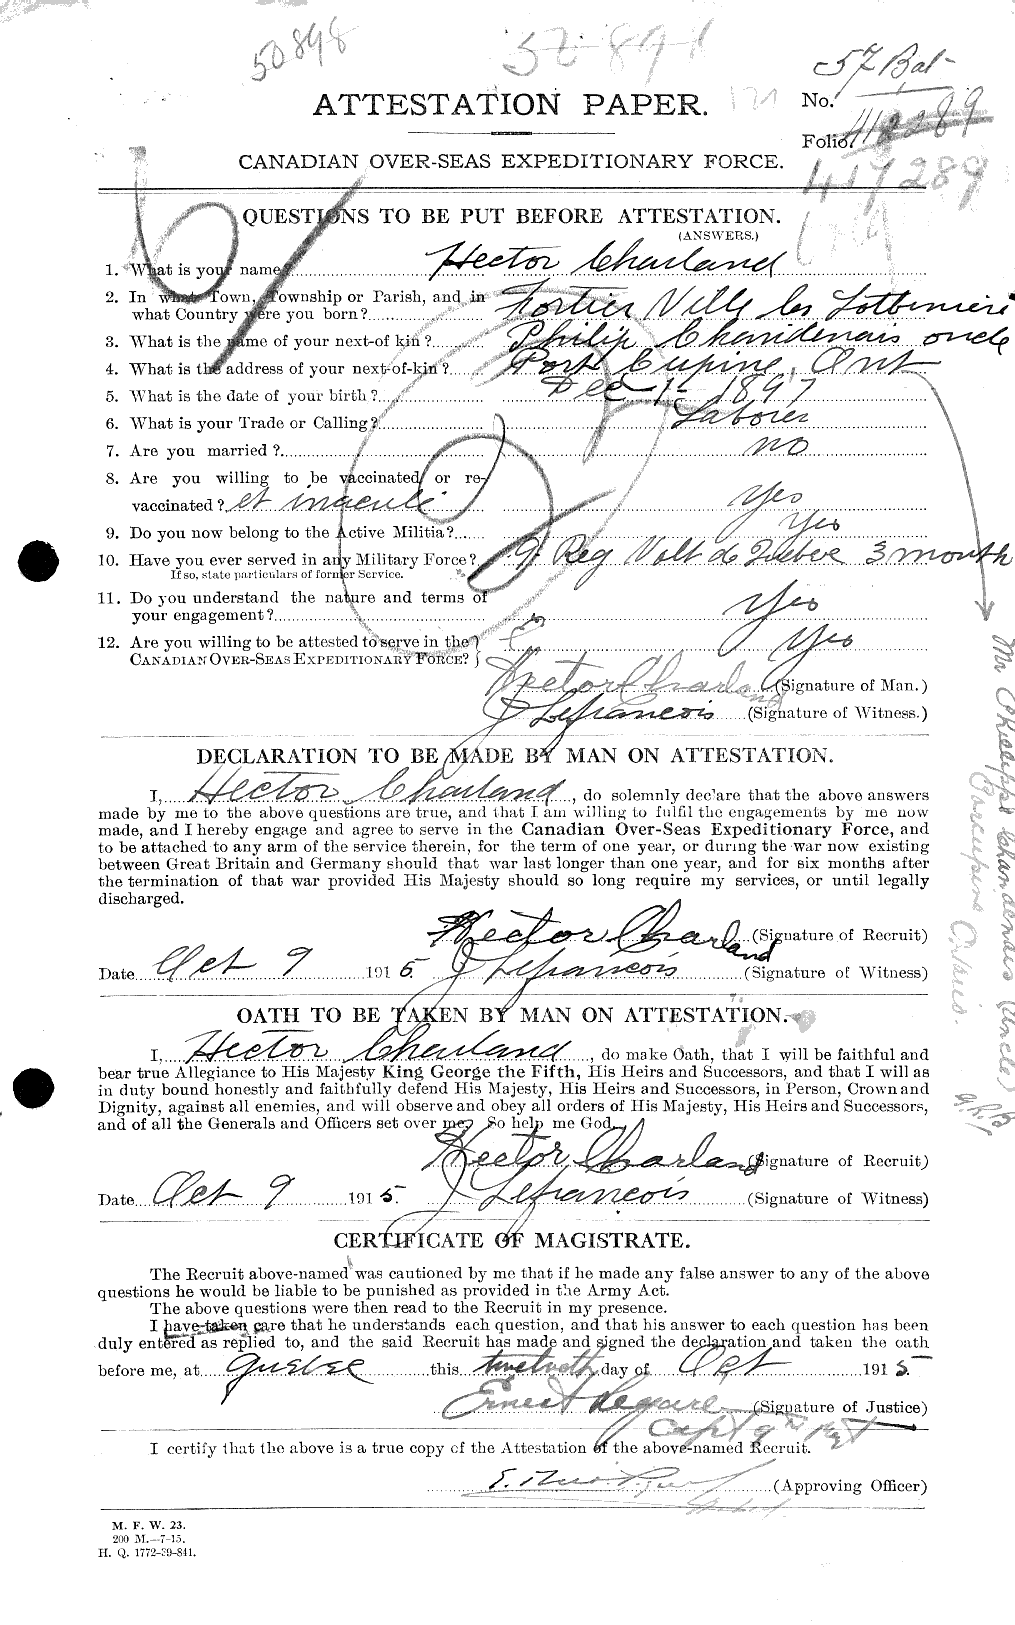 Personnel Records of the First World War - CEF 015556a